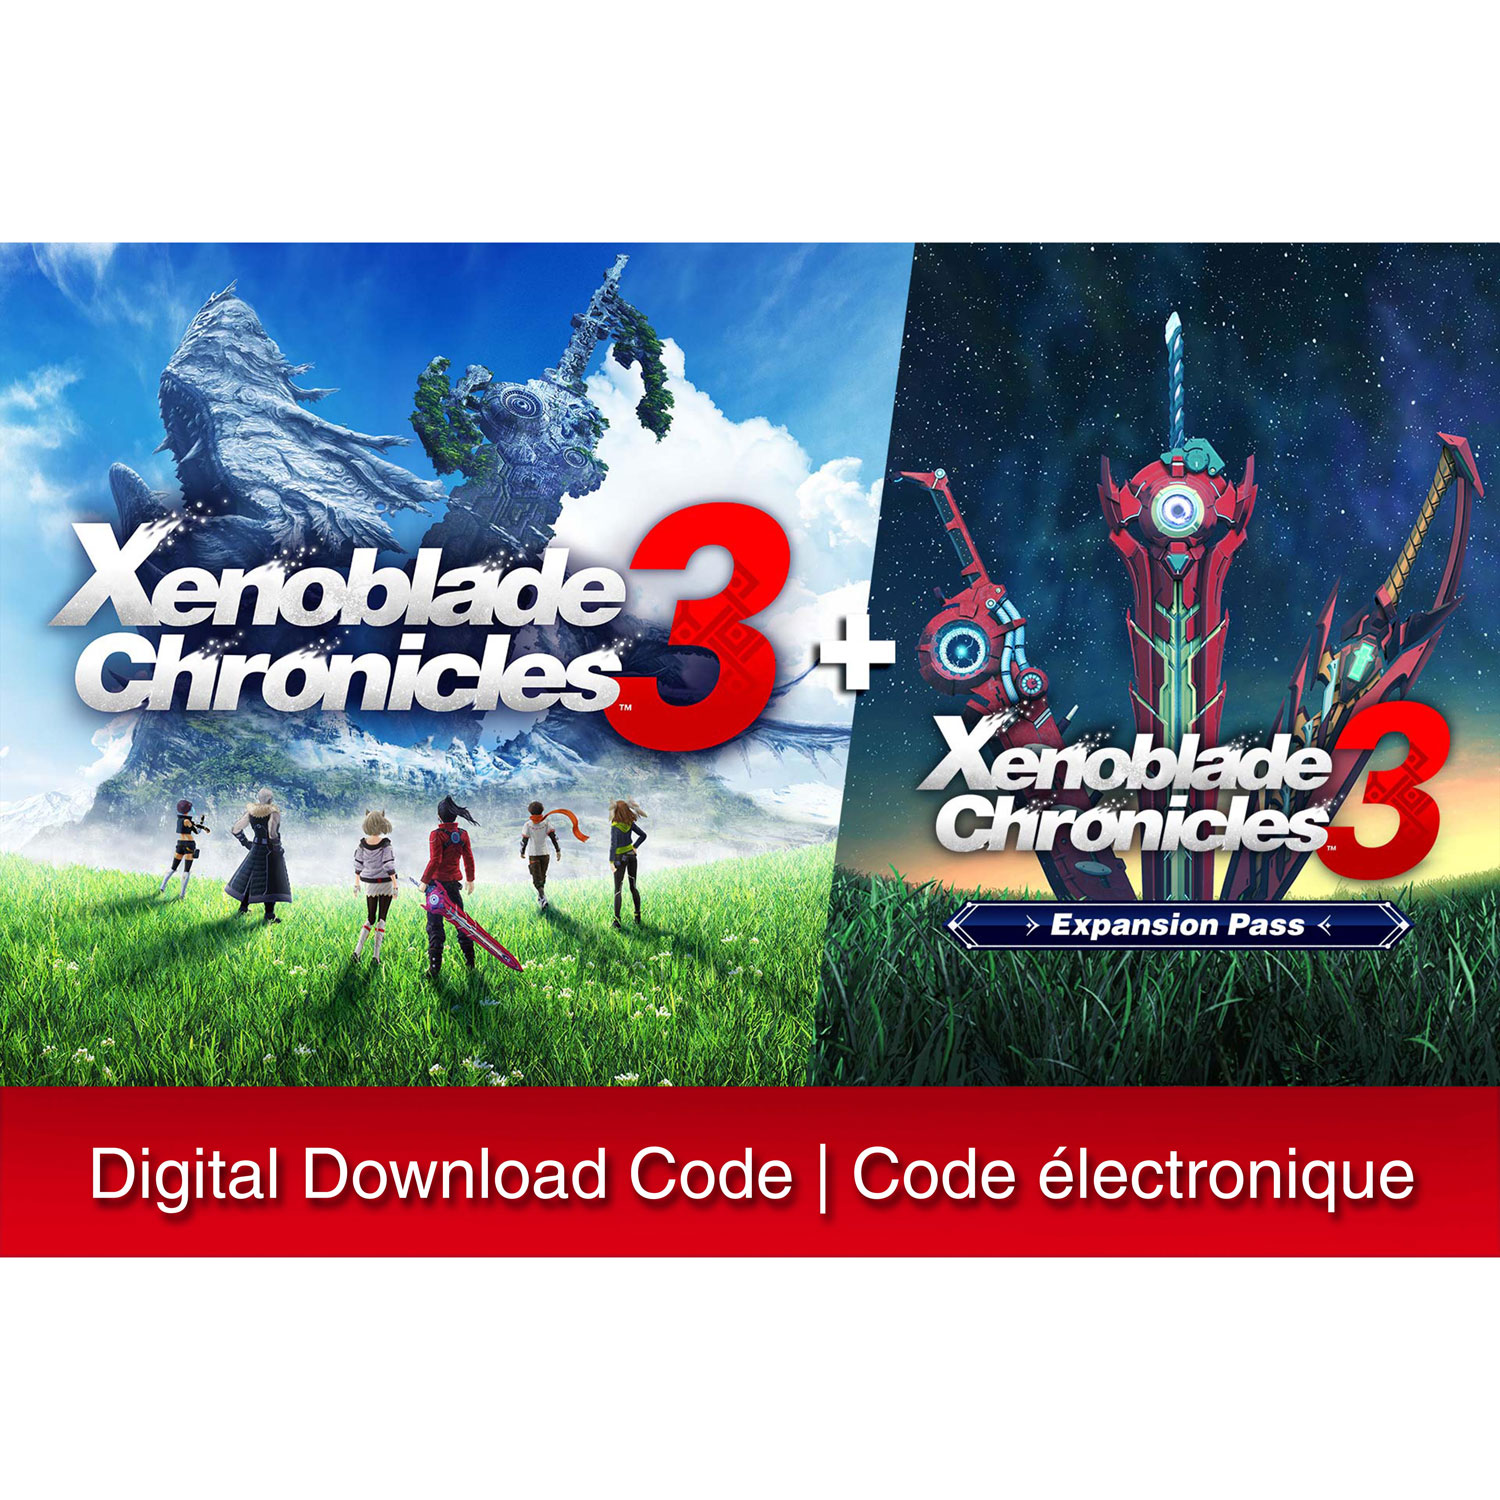 Xenoblade Chronicles 3 + Expansion Pass (Switch) - Digital Download